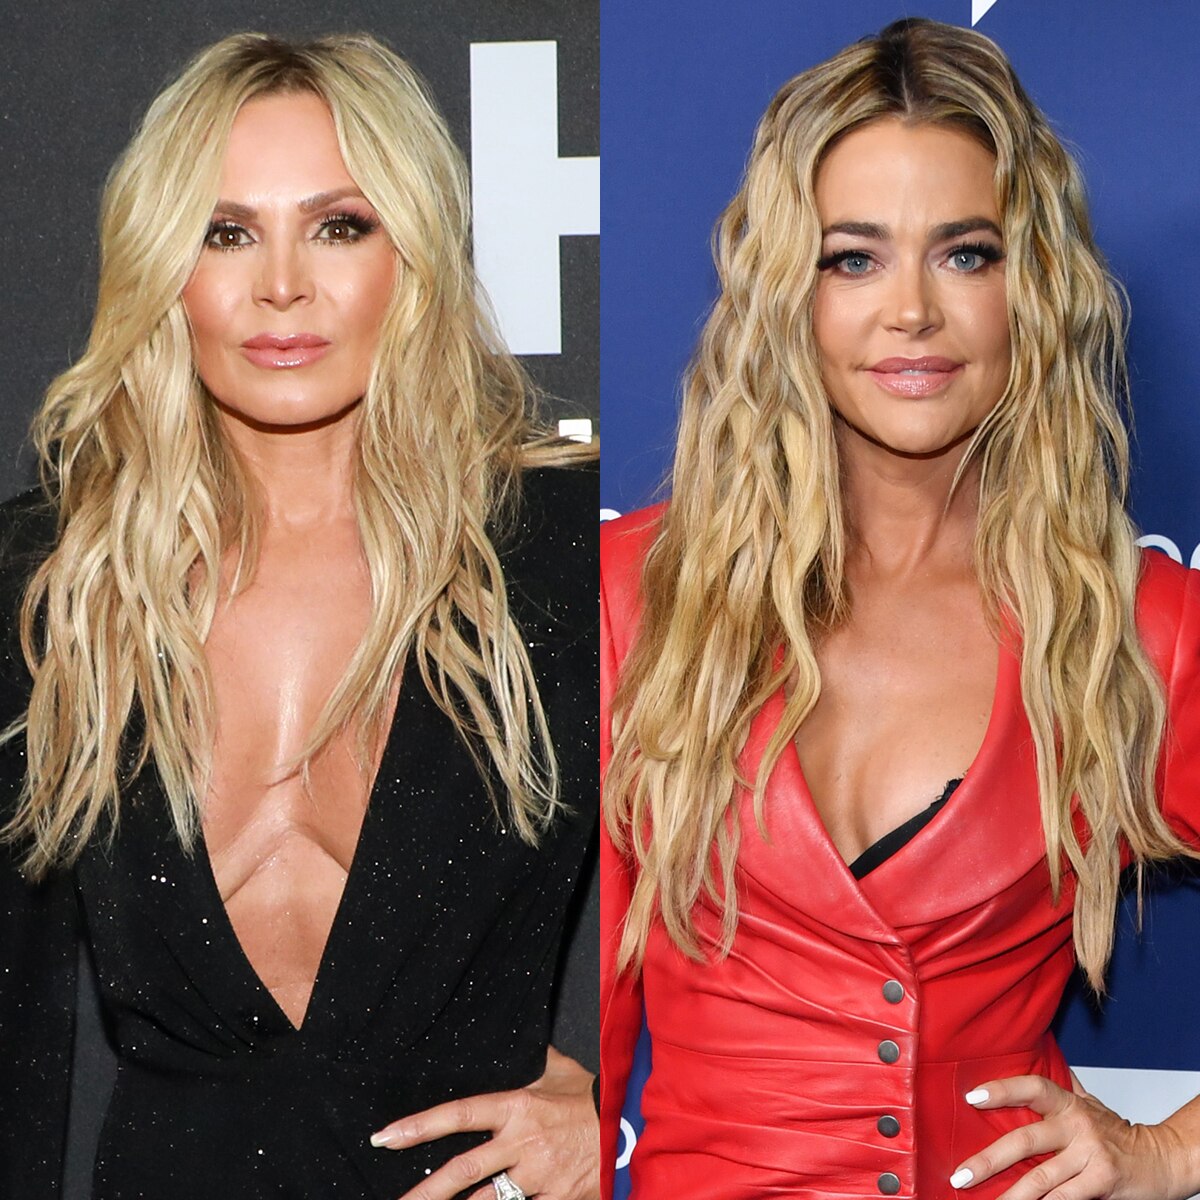 Tamra Judge Says Denise Richards Tried to Hook Up With